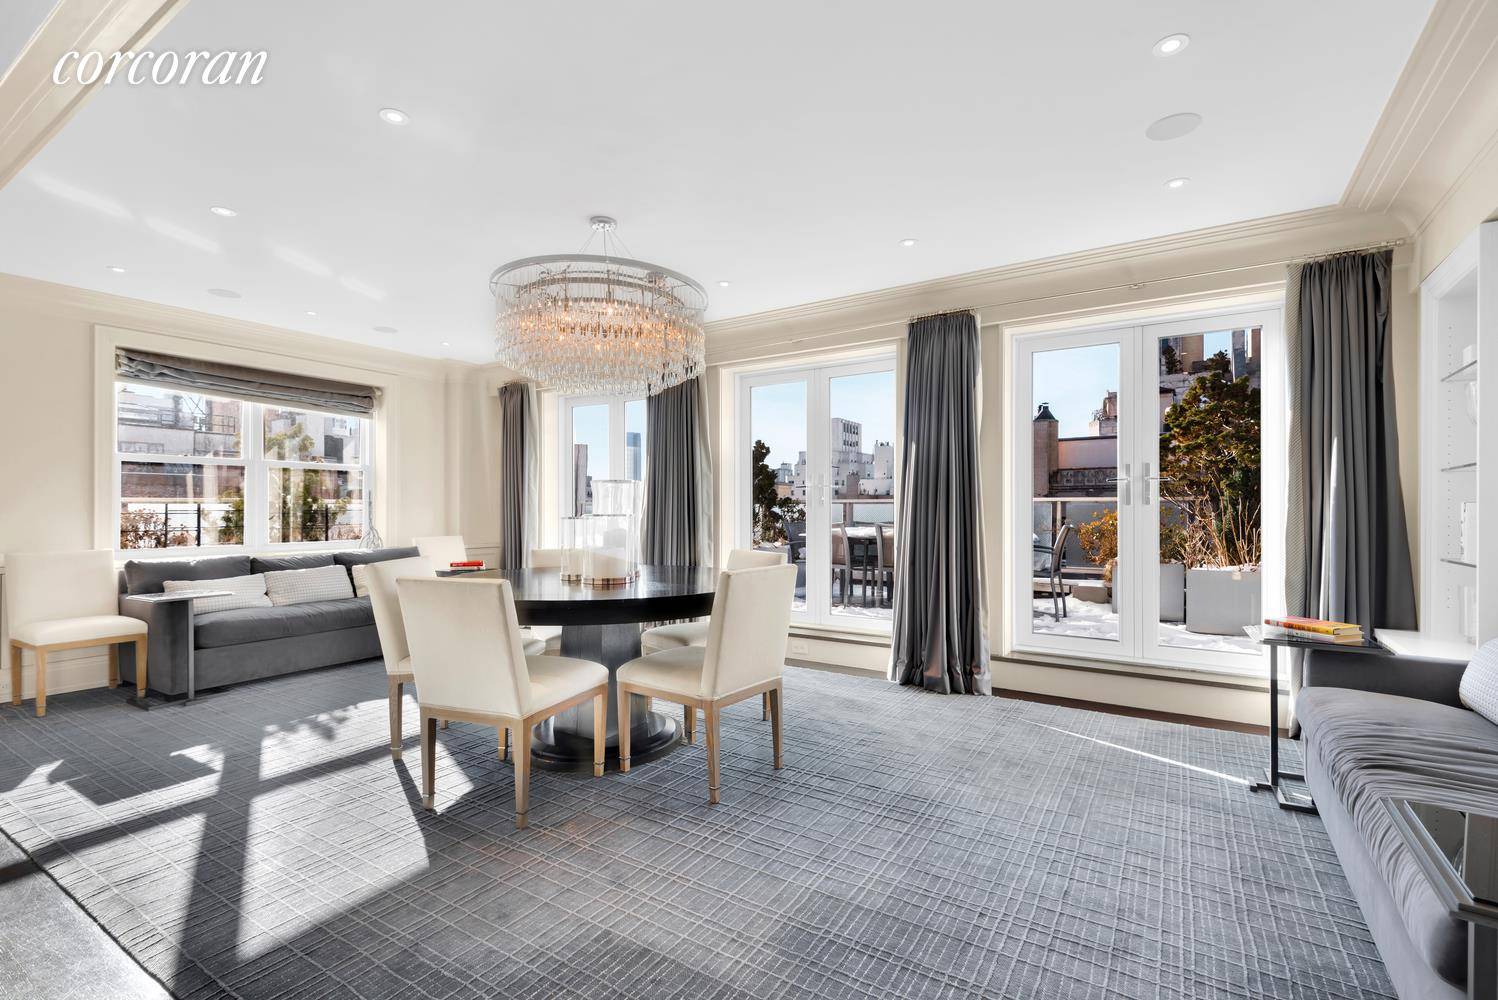 Extraordinary features come together in this sun filled, high floor corner 8 room duplex penthouse high atop the A Gold CoastA of ManhattanA s Upper East Side.